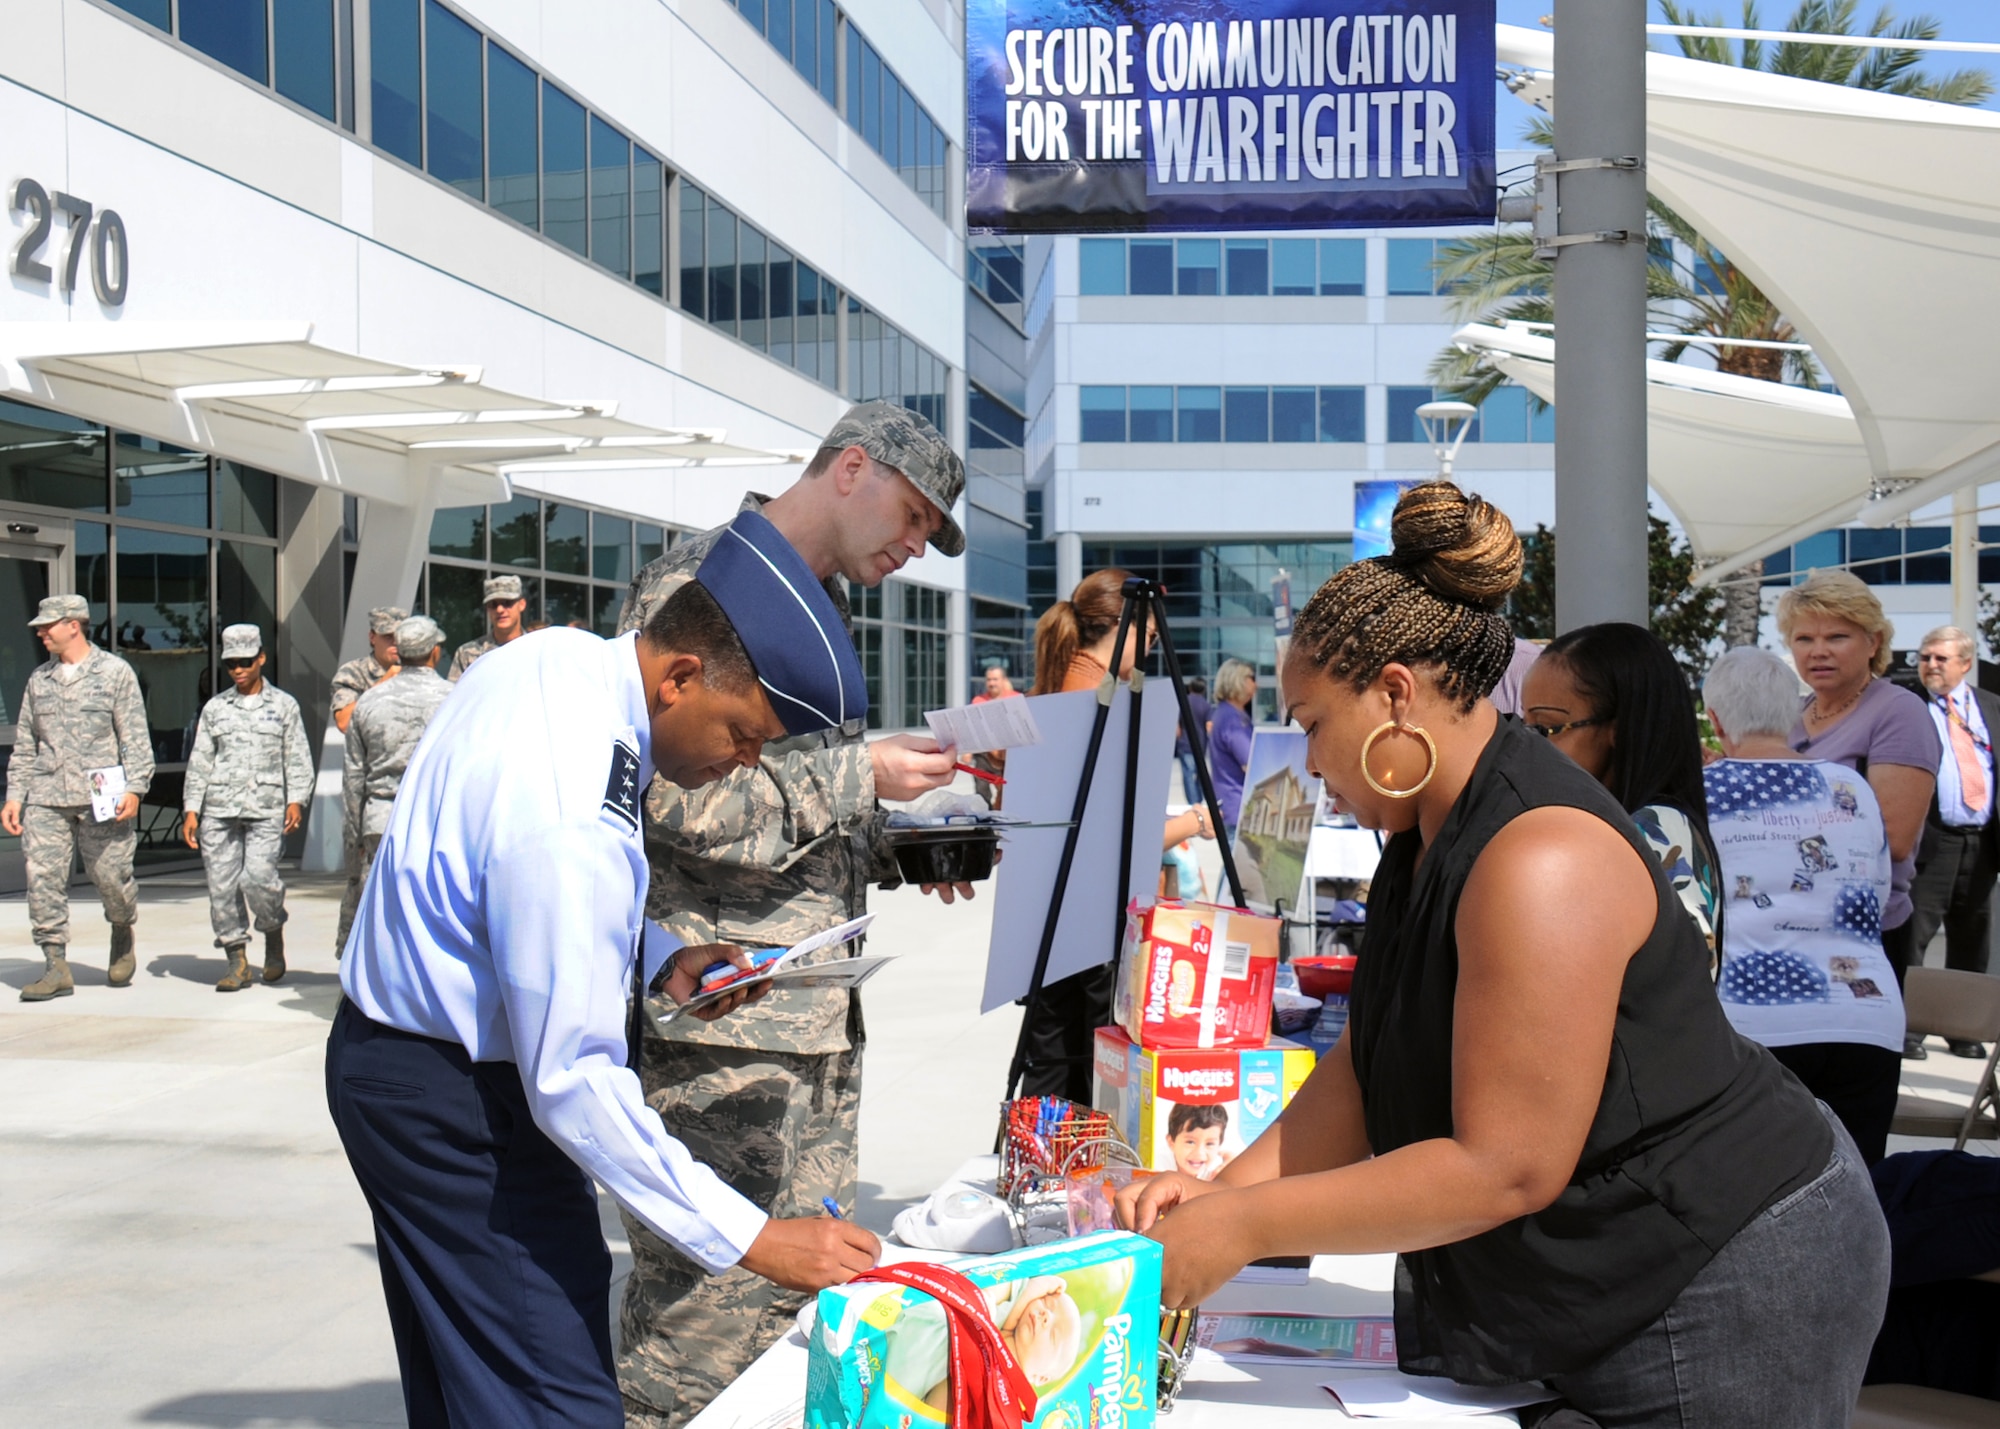 Lt. Gen. Samuel Greaves, SMC commander, talks with a representative from one of the many organizations represented at the CFC kickoff about her charity. Donors can choose from more than 2,500 local and national charities including veterans, cultural, medical, relief, educational, environmental and animal organizations. (U.S Air Force photo by Van Ha)